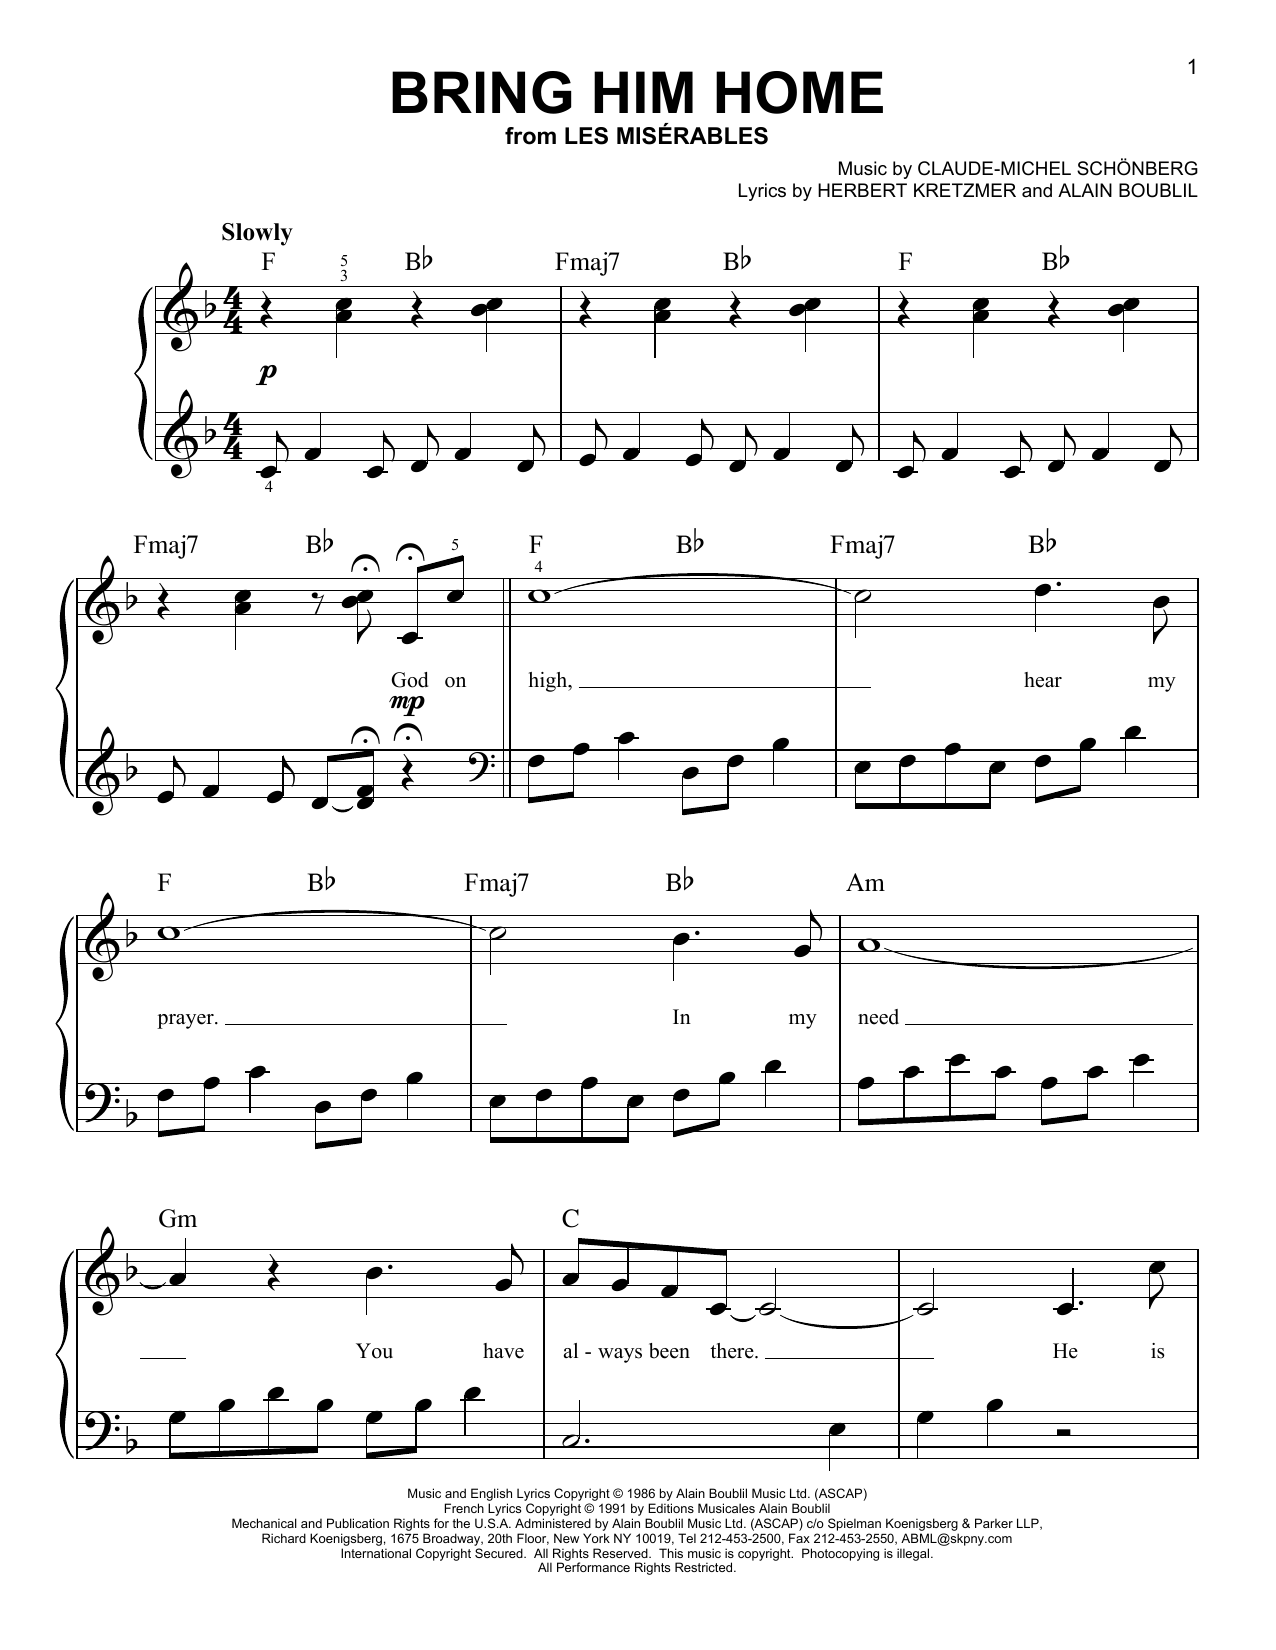 Download Boublil and Schonberg Bring Him Home (from Les Miserables) Sheet Music